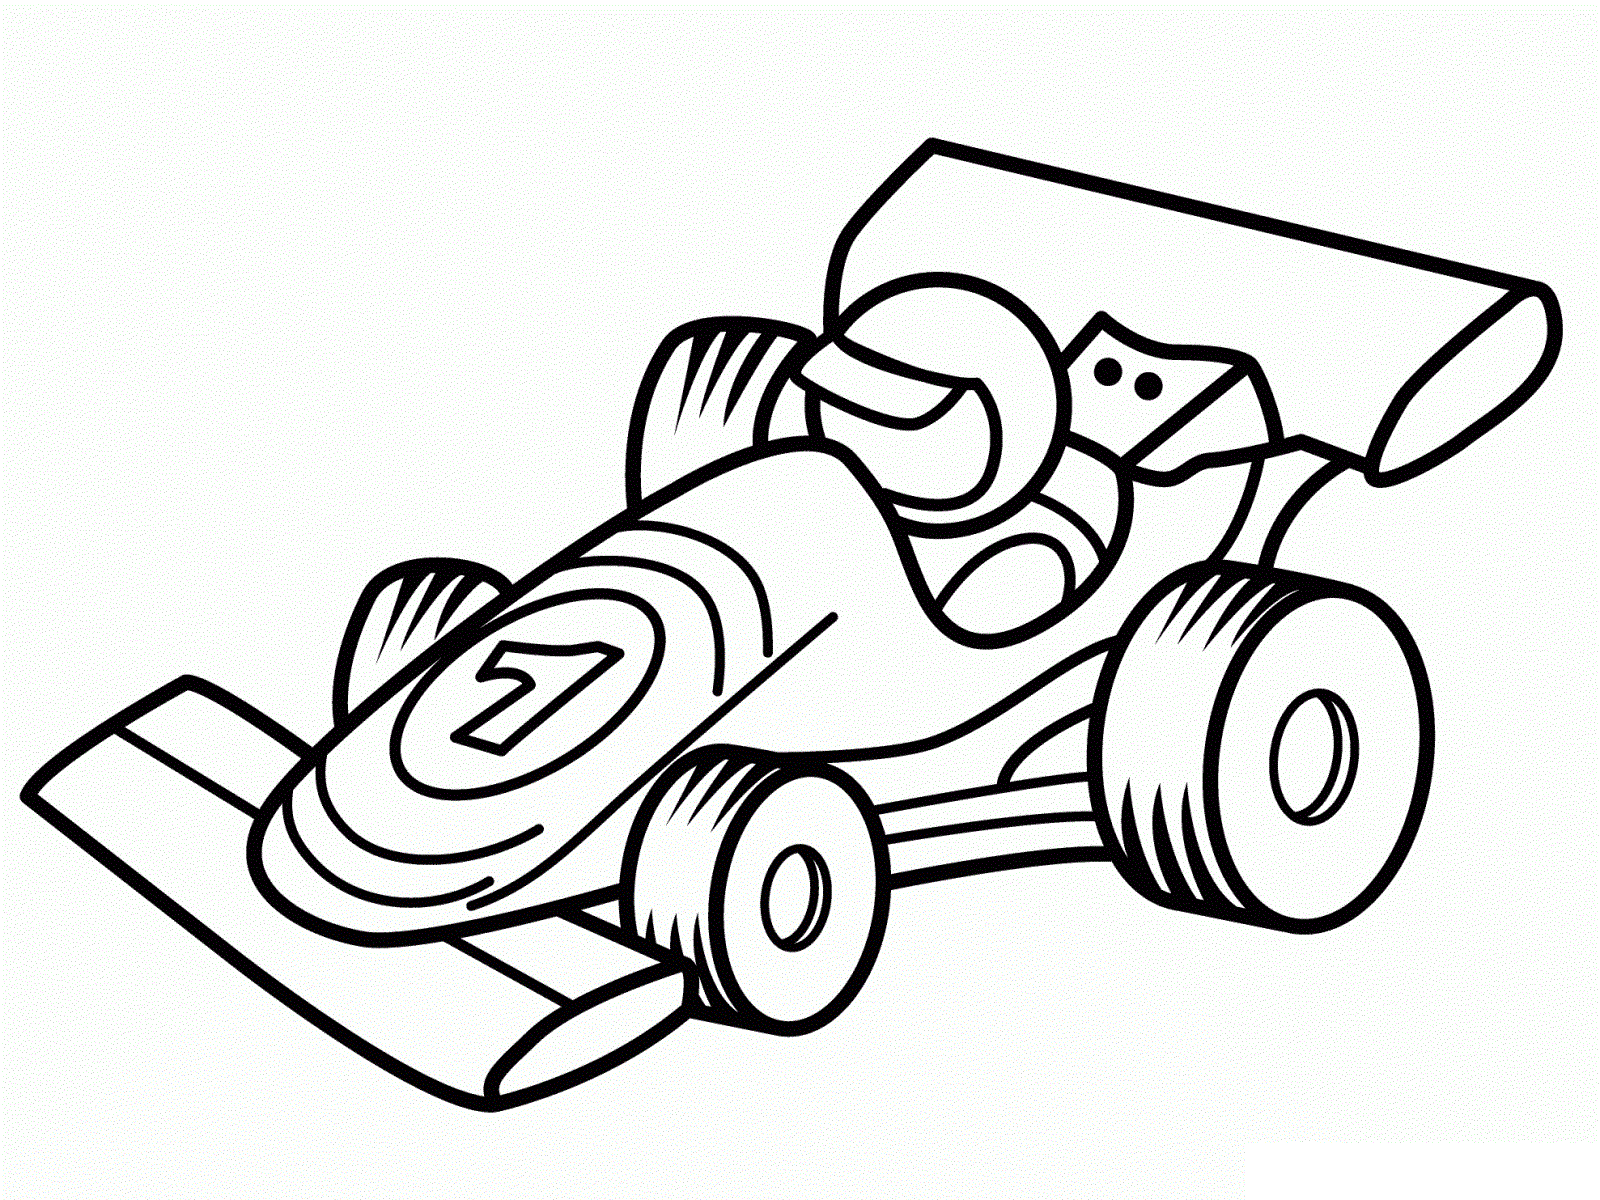 little-formula-racing-car-coloring-page-free-printable-coloring-pages